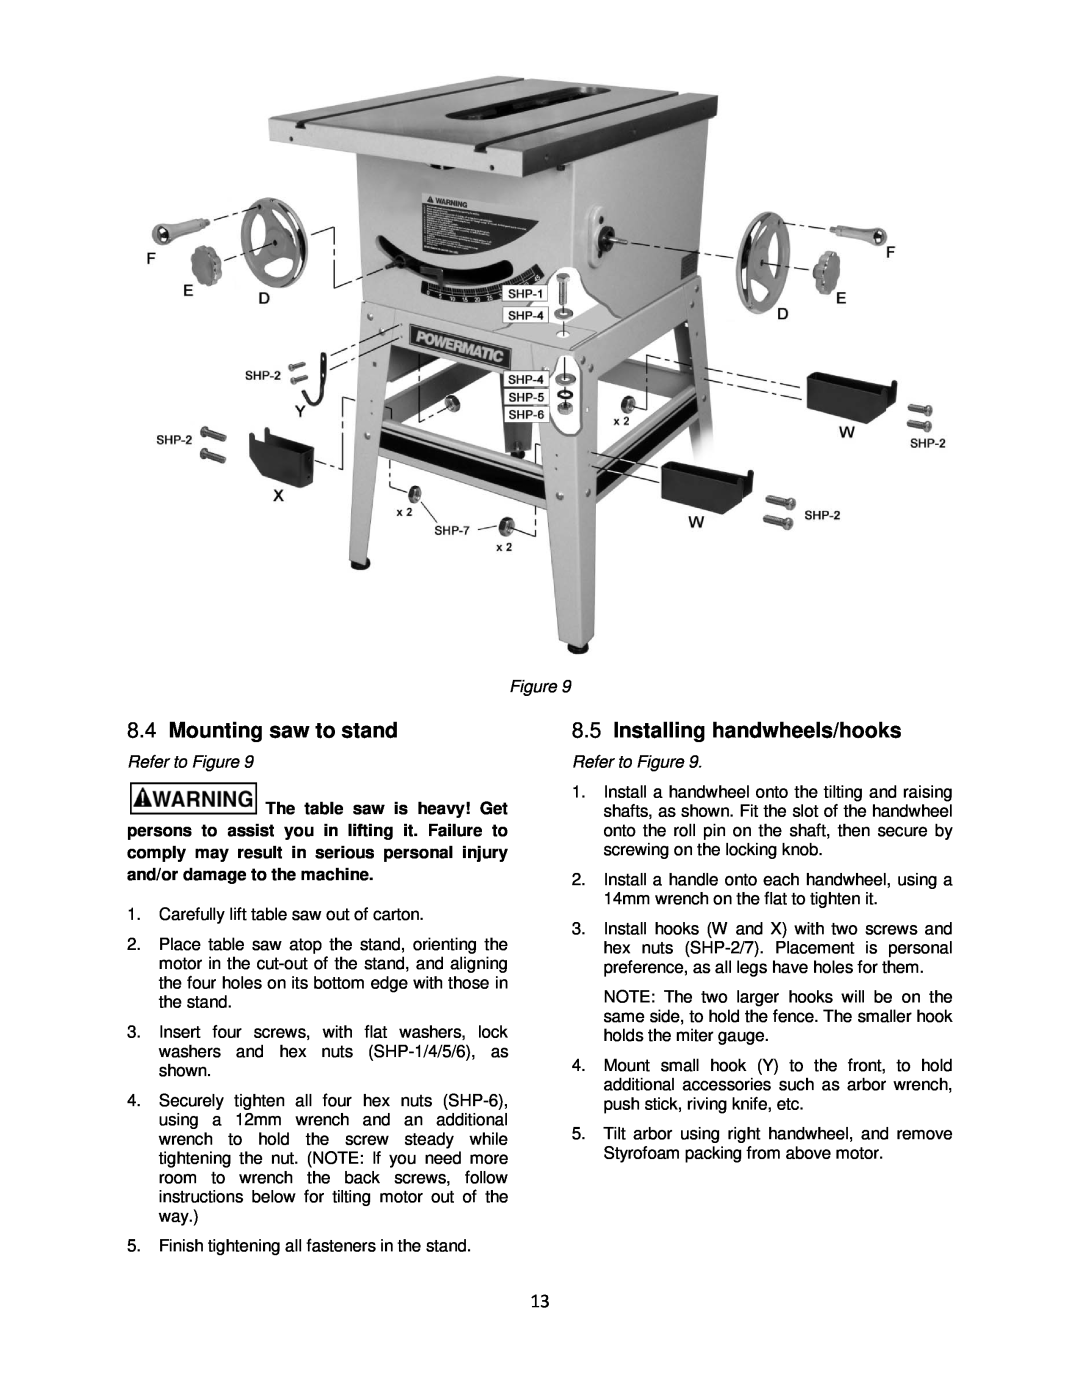 Powermatic 64B operating instructions Mounting saw to stand, Installing handwheels/hooks 